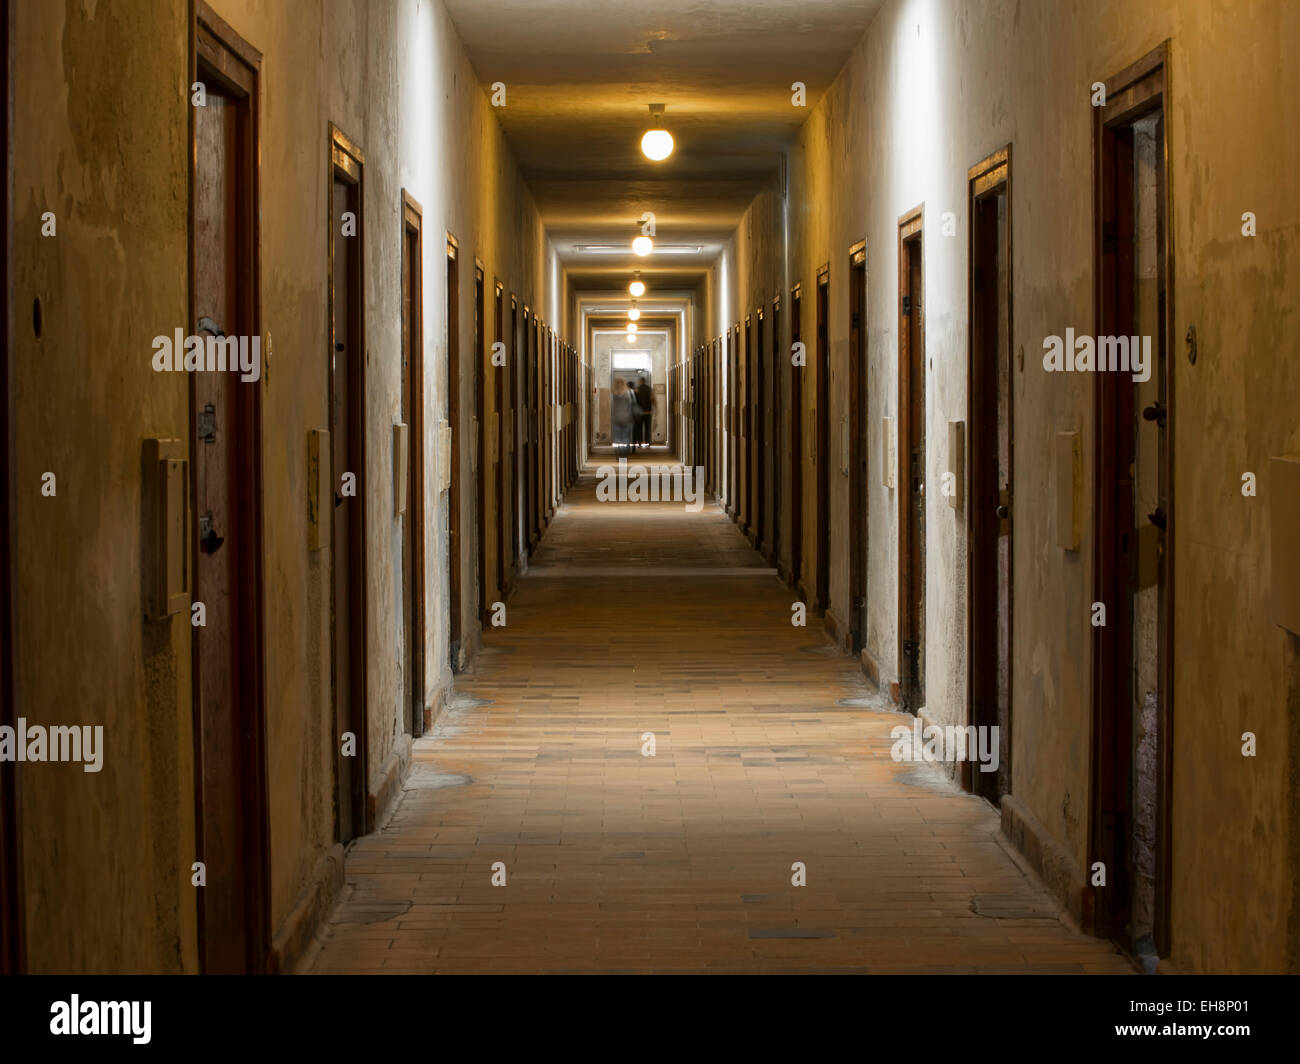 Munich Germany Dachau Concentration Camp cell doors, hallway Stock Photo